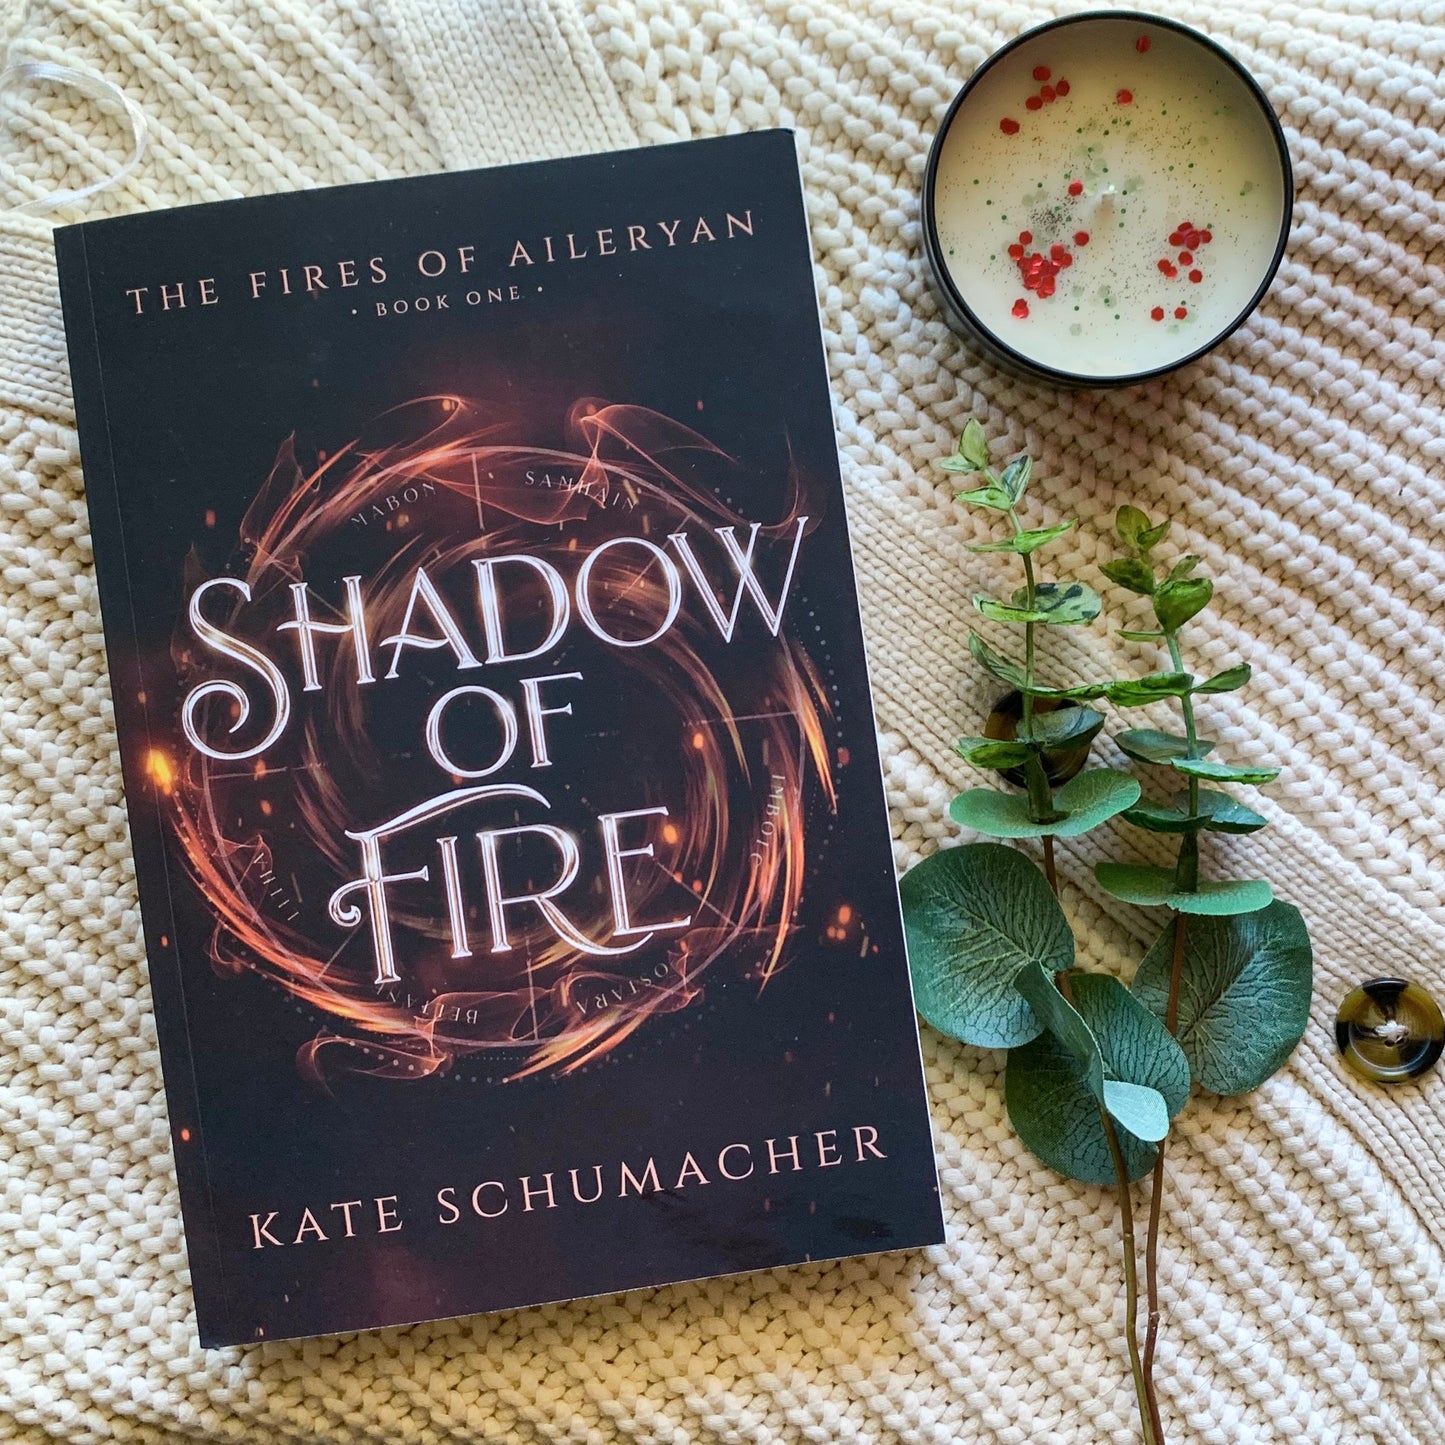 The Fires of Aileryan Series by Kate Schumacher